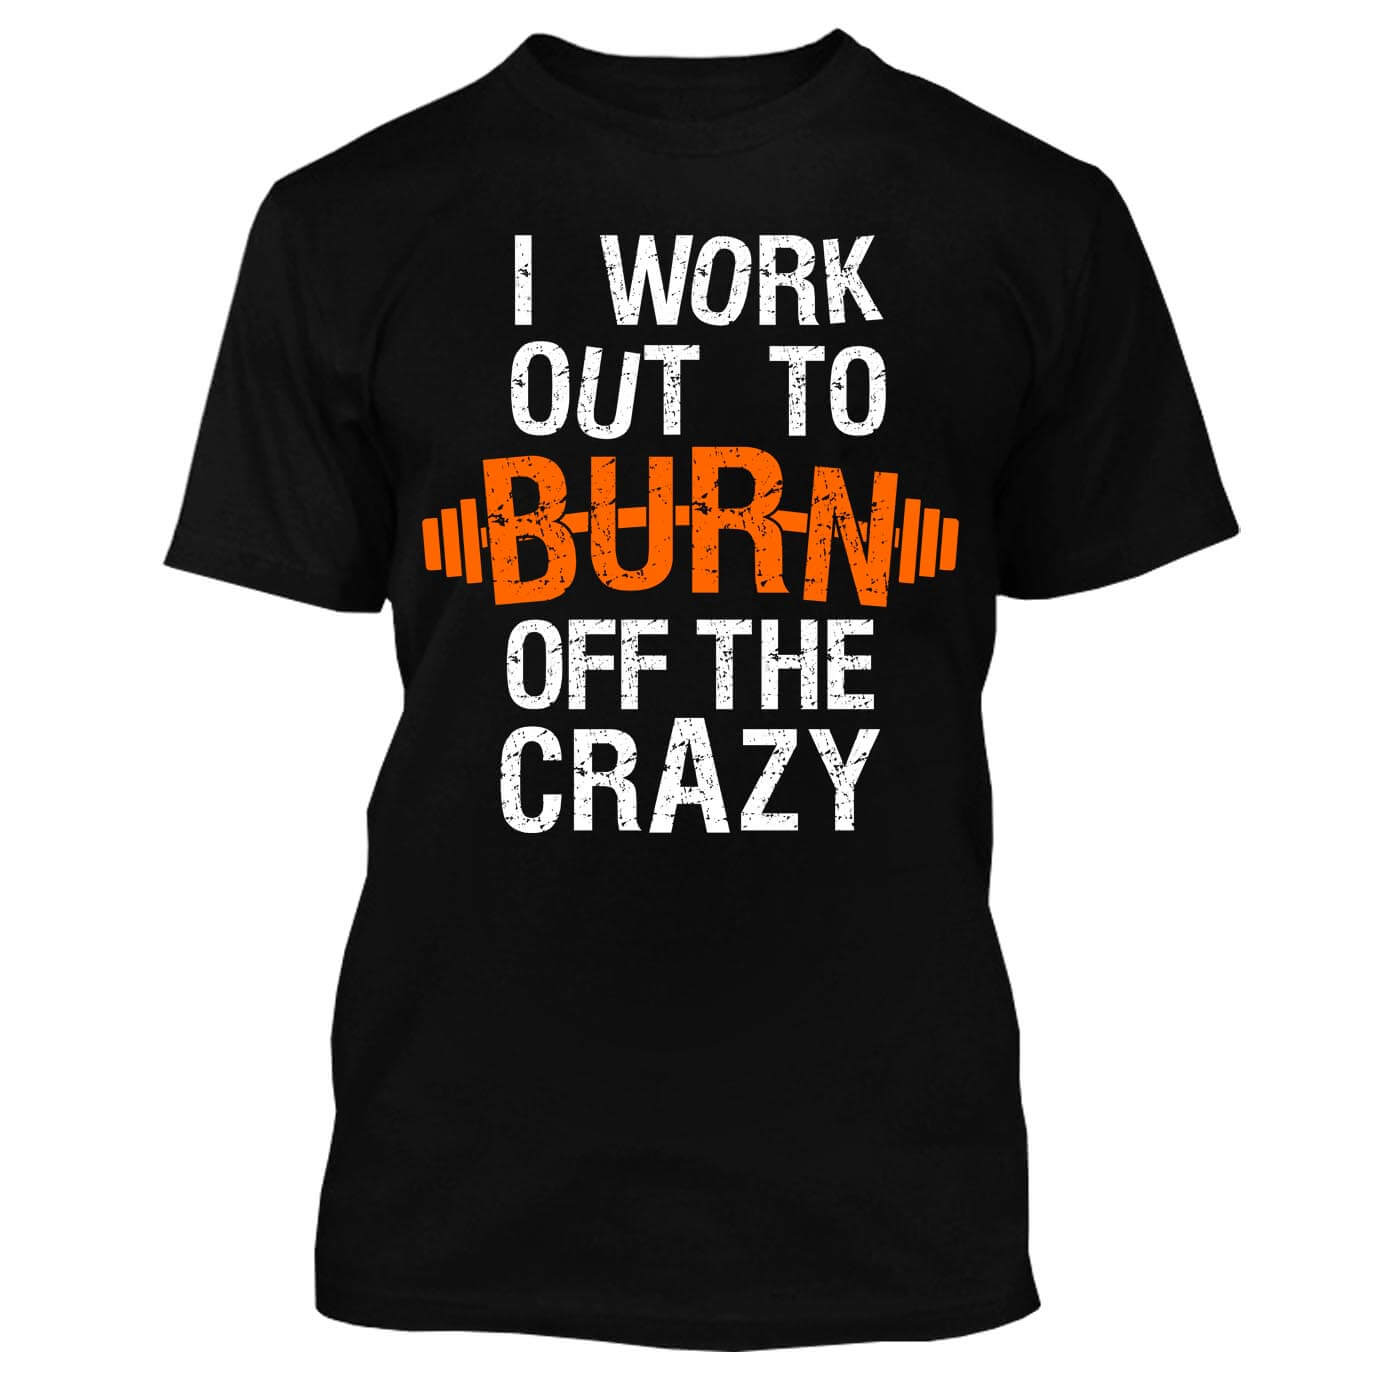 I Work Out To Burn Off The Crazy